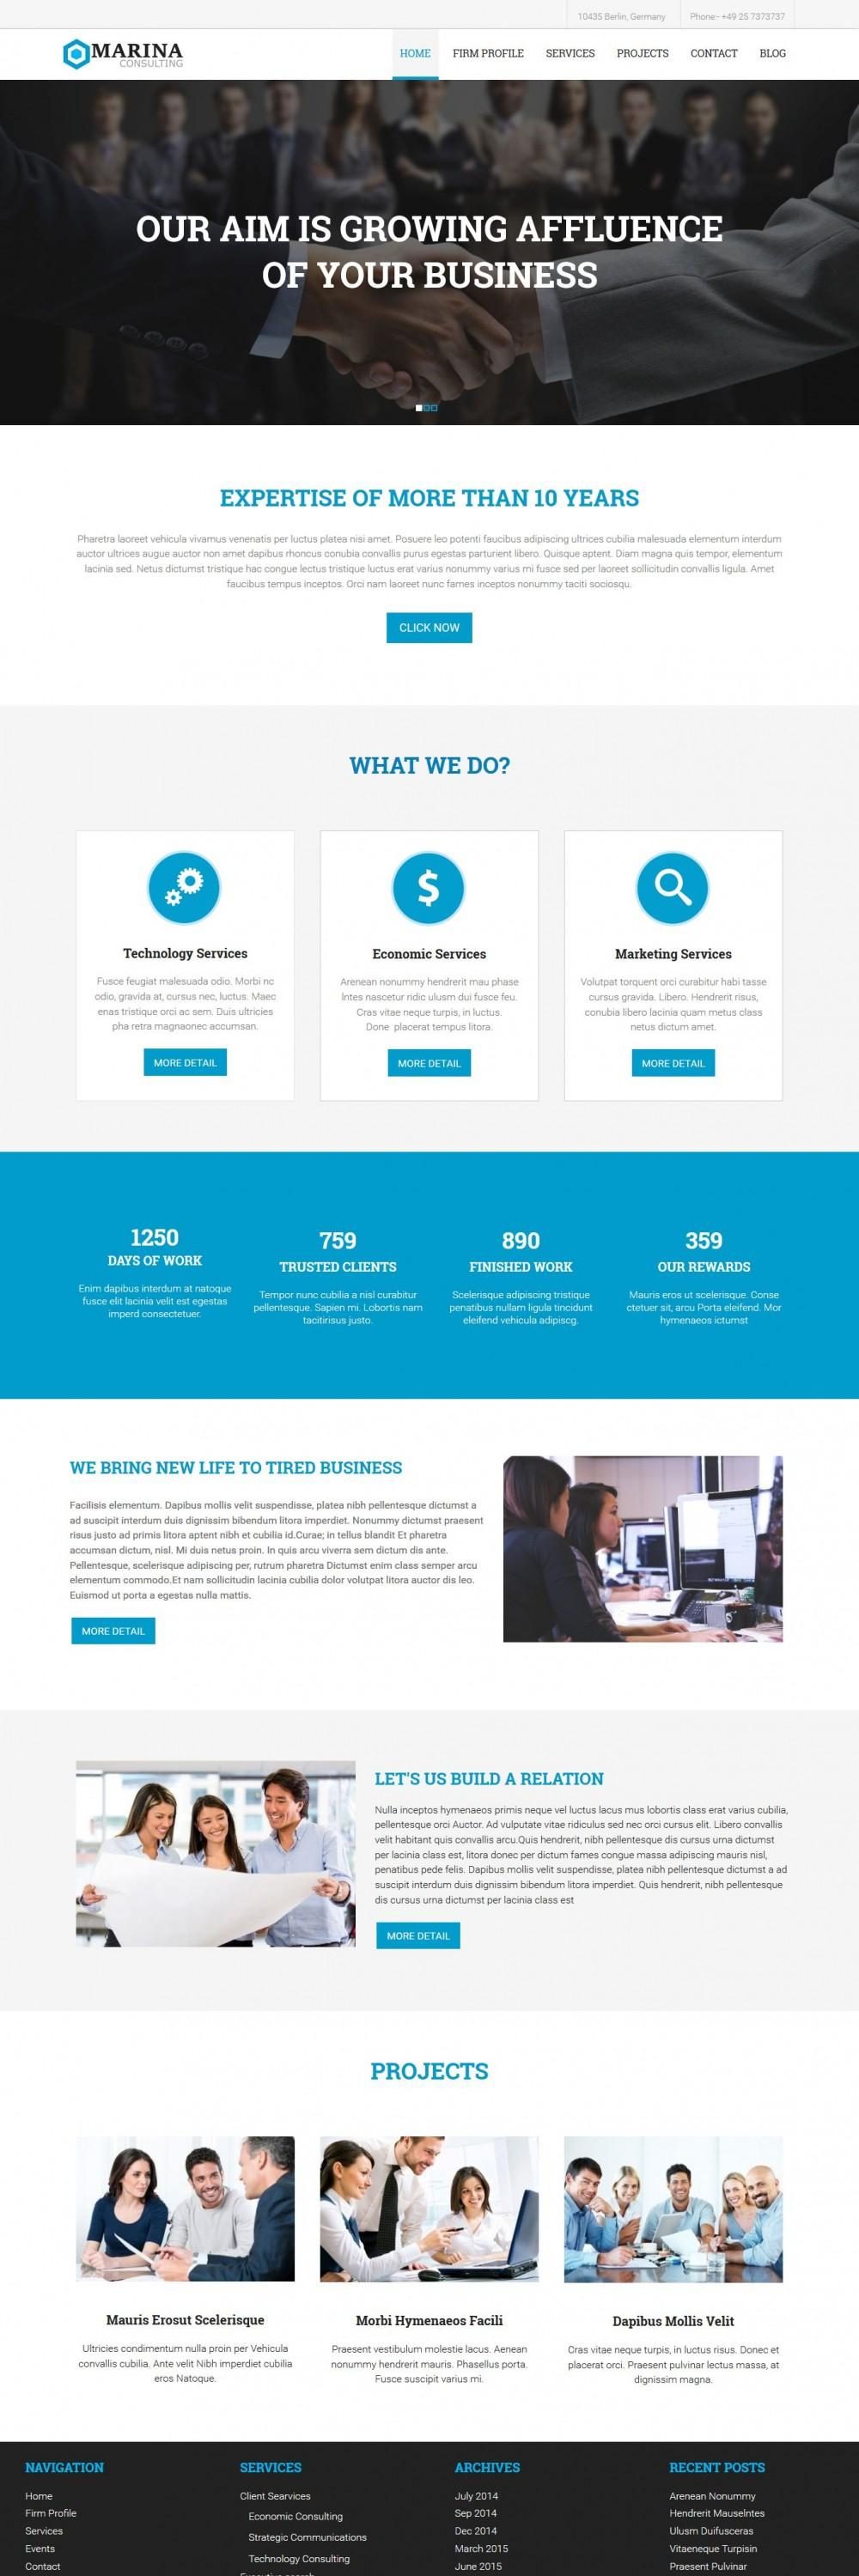 marina joomla template for business marketing consultant